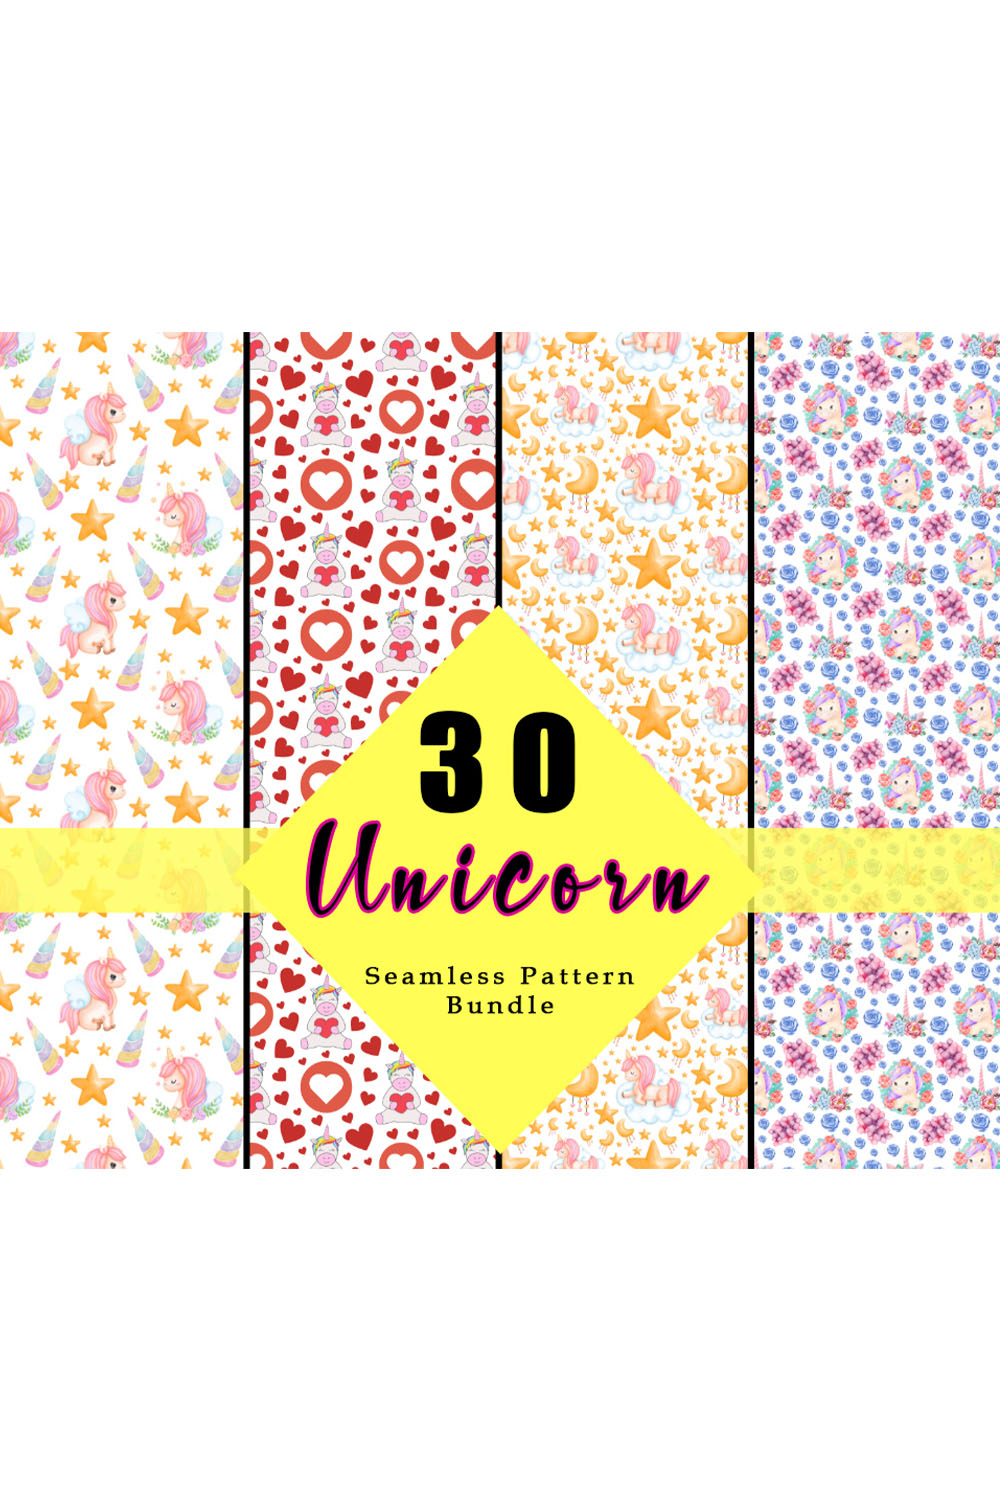 A pack of images of gorgeous patterns with unicorns